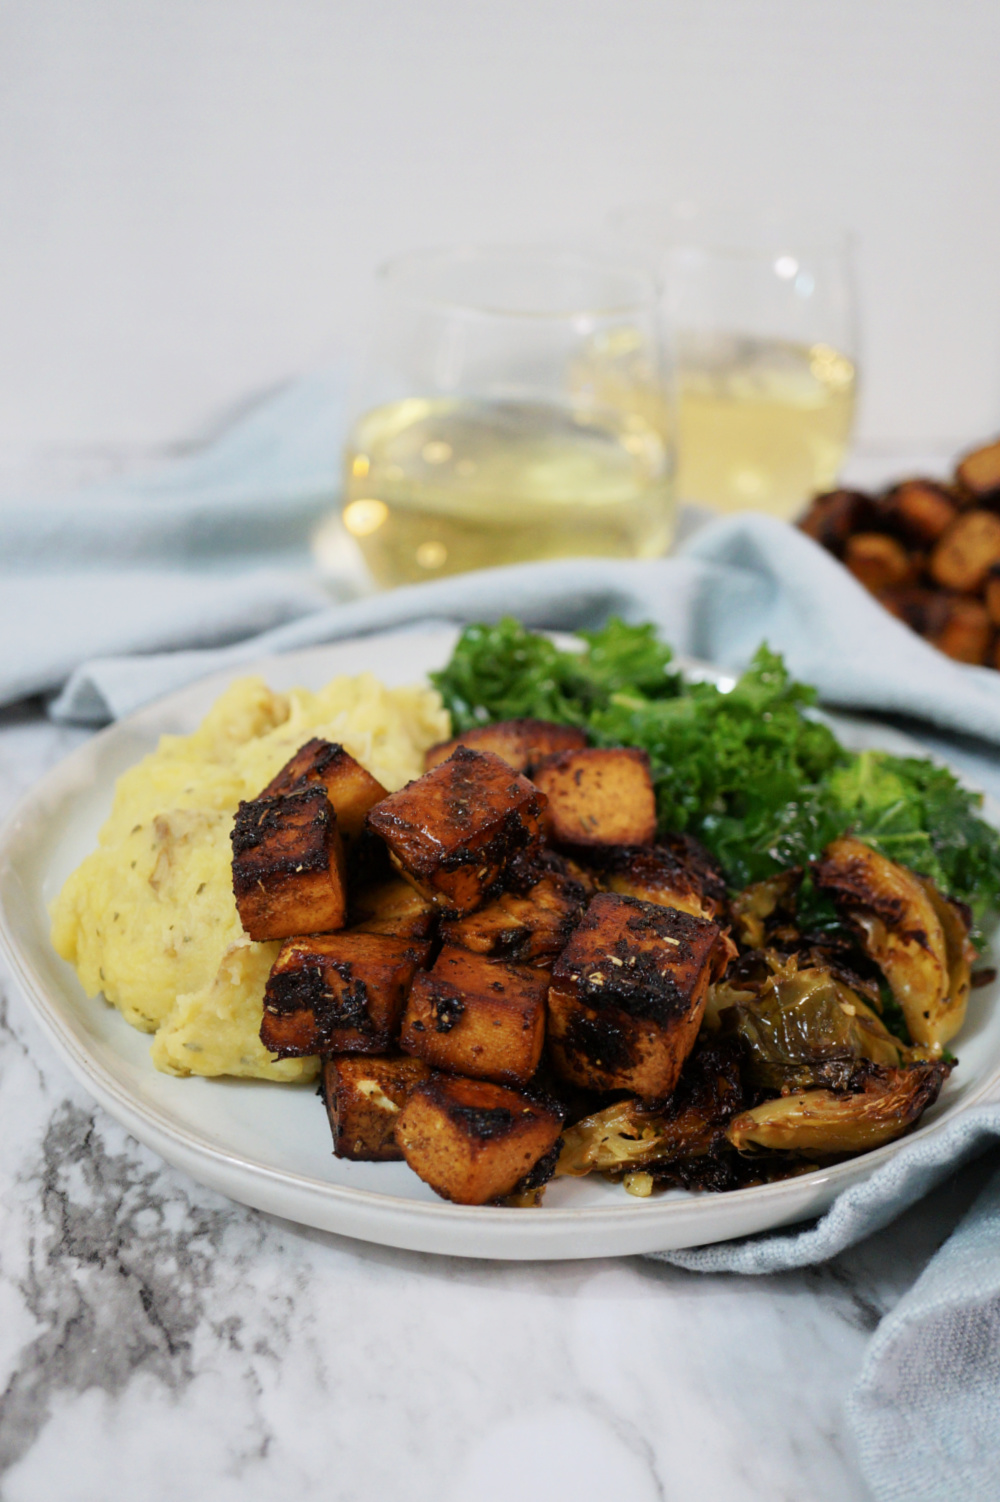 balsamic herb tofu on a plate with mashed potatoes and kale salad